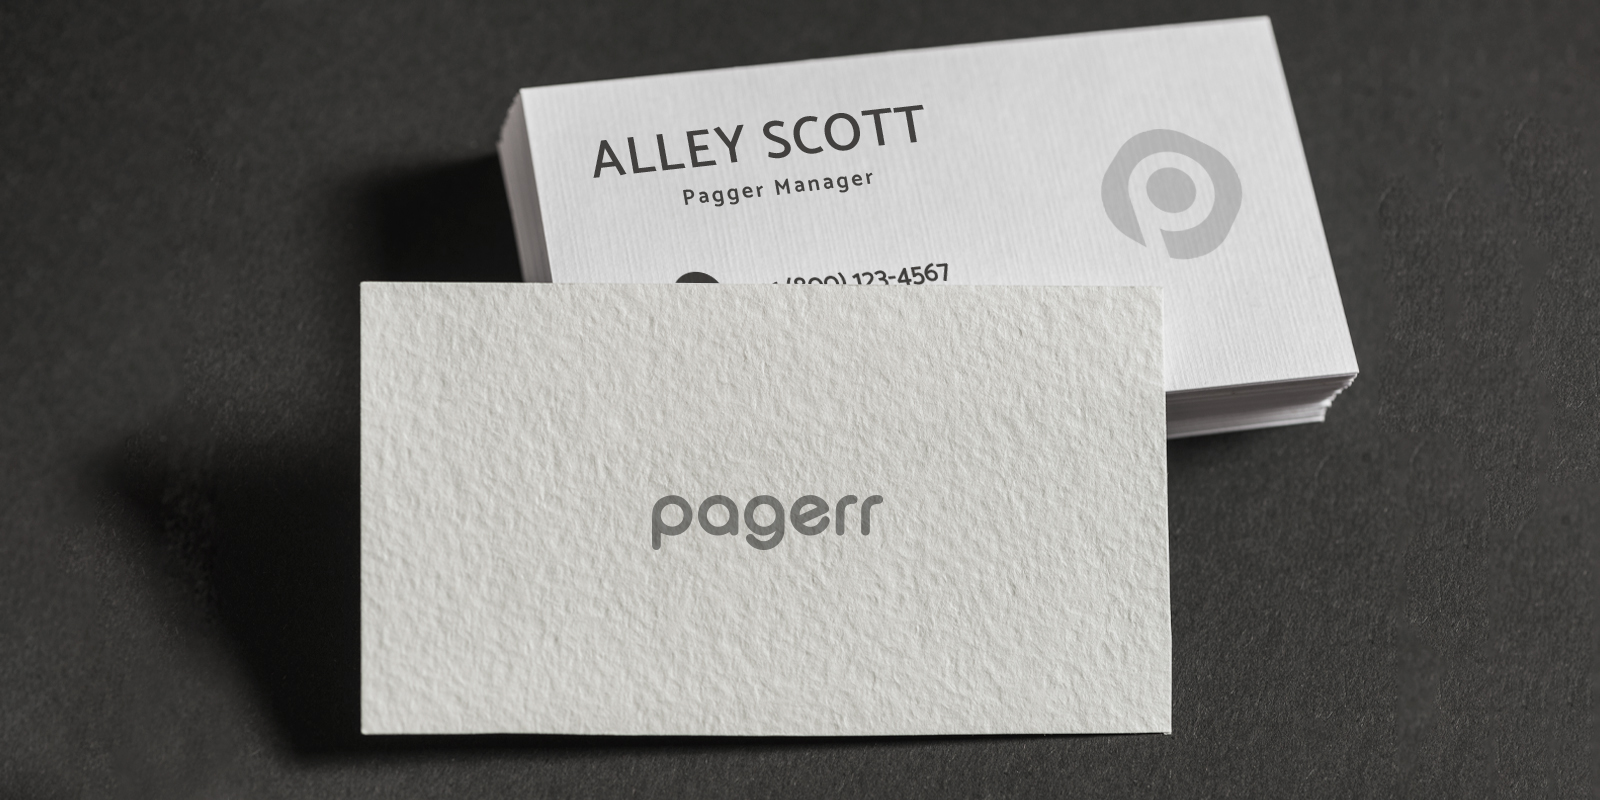 Special material business cards in Gold Coast - Print with Pagerr